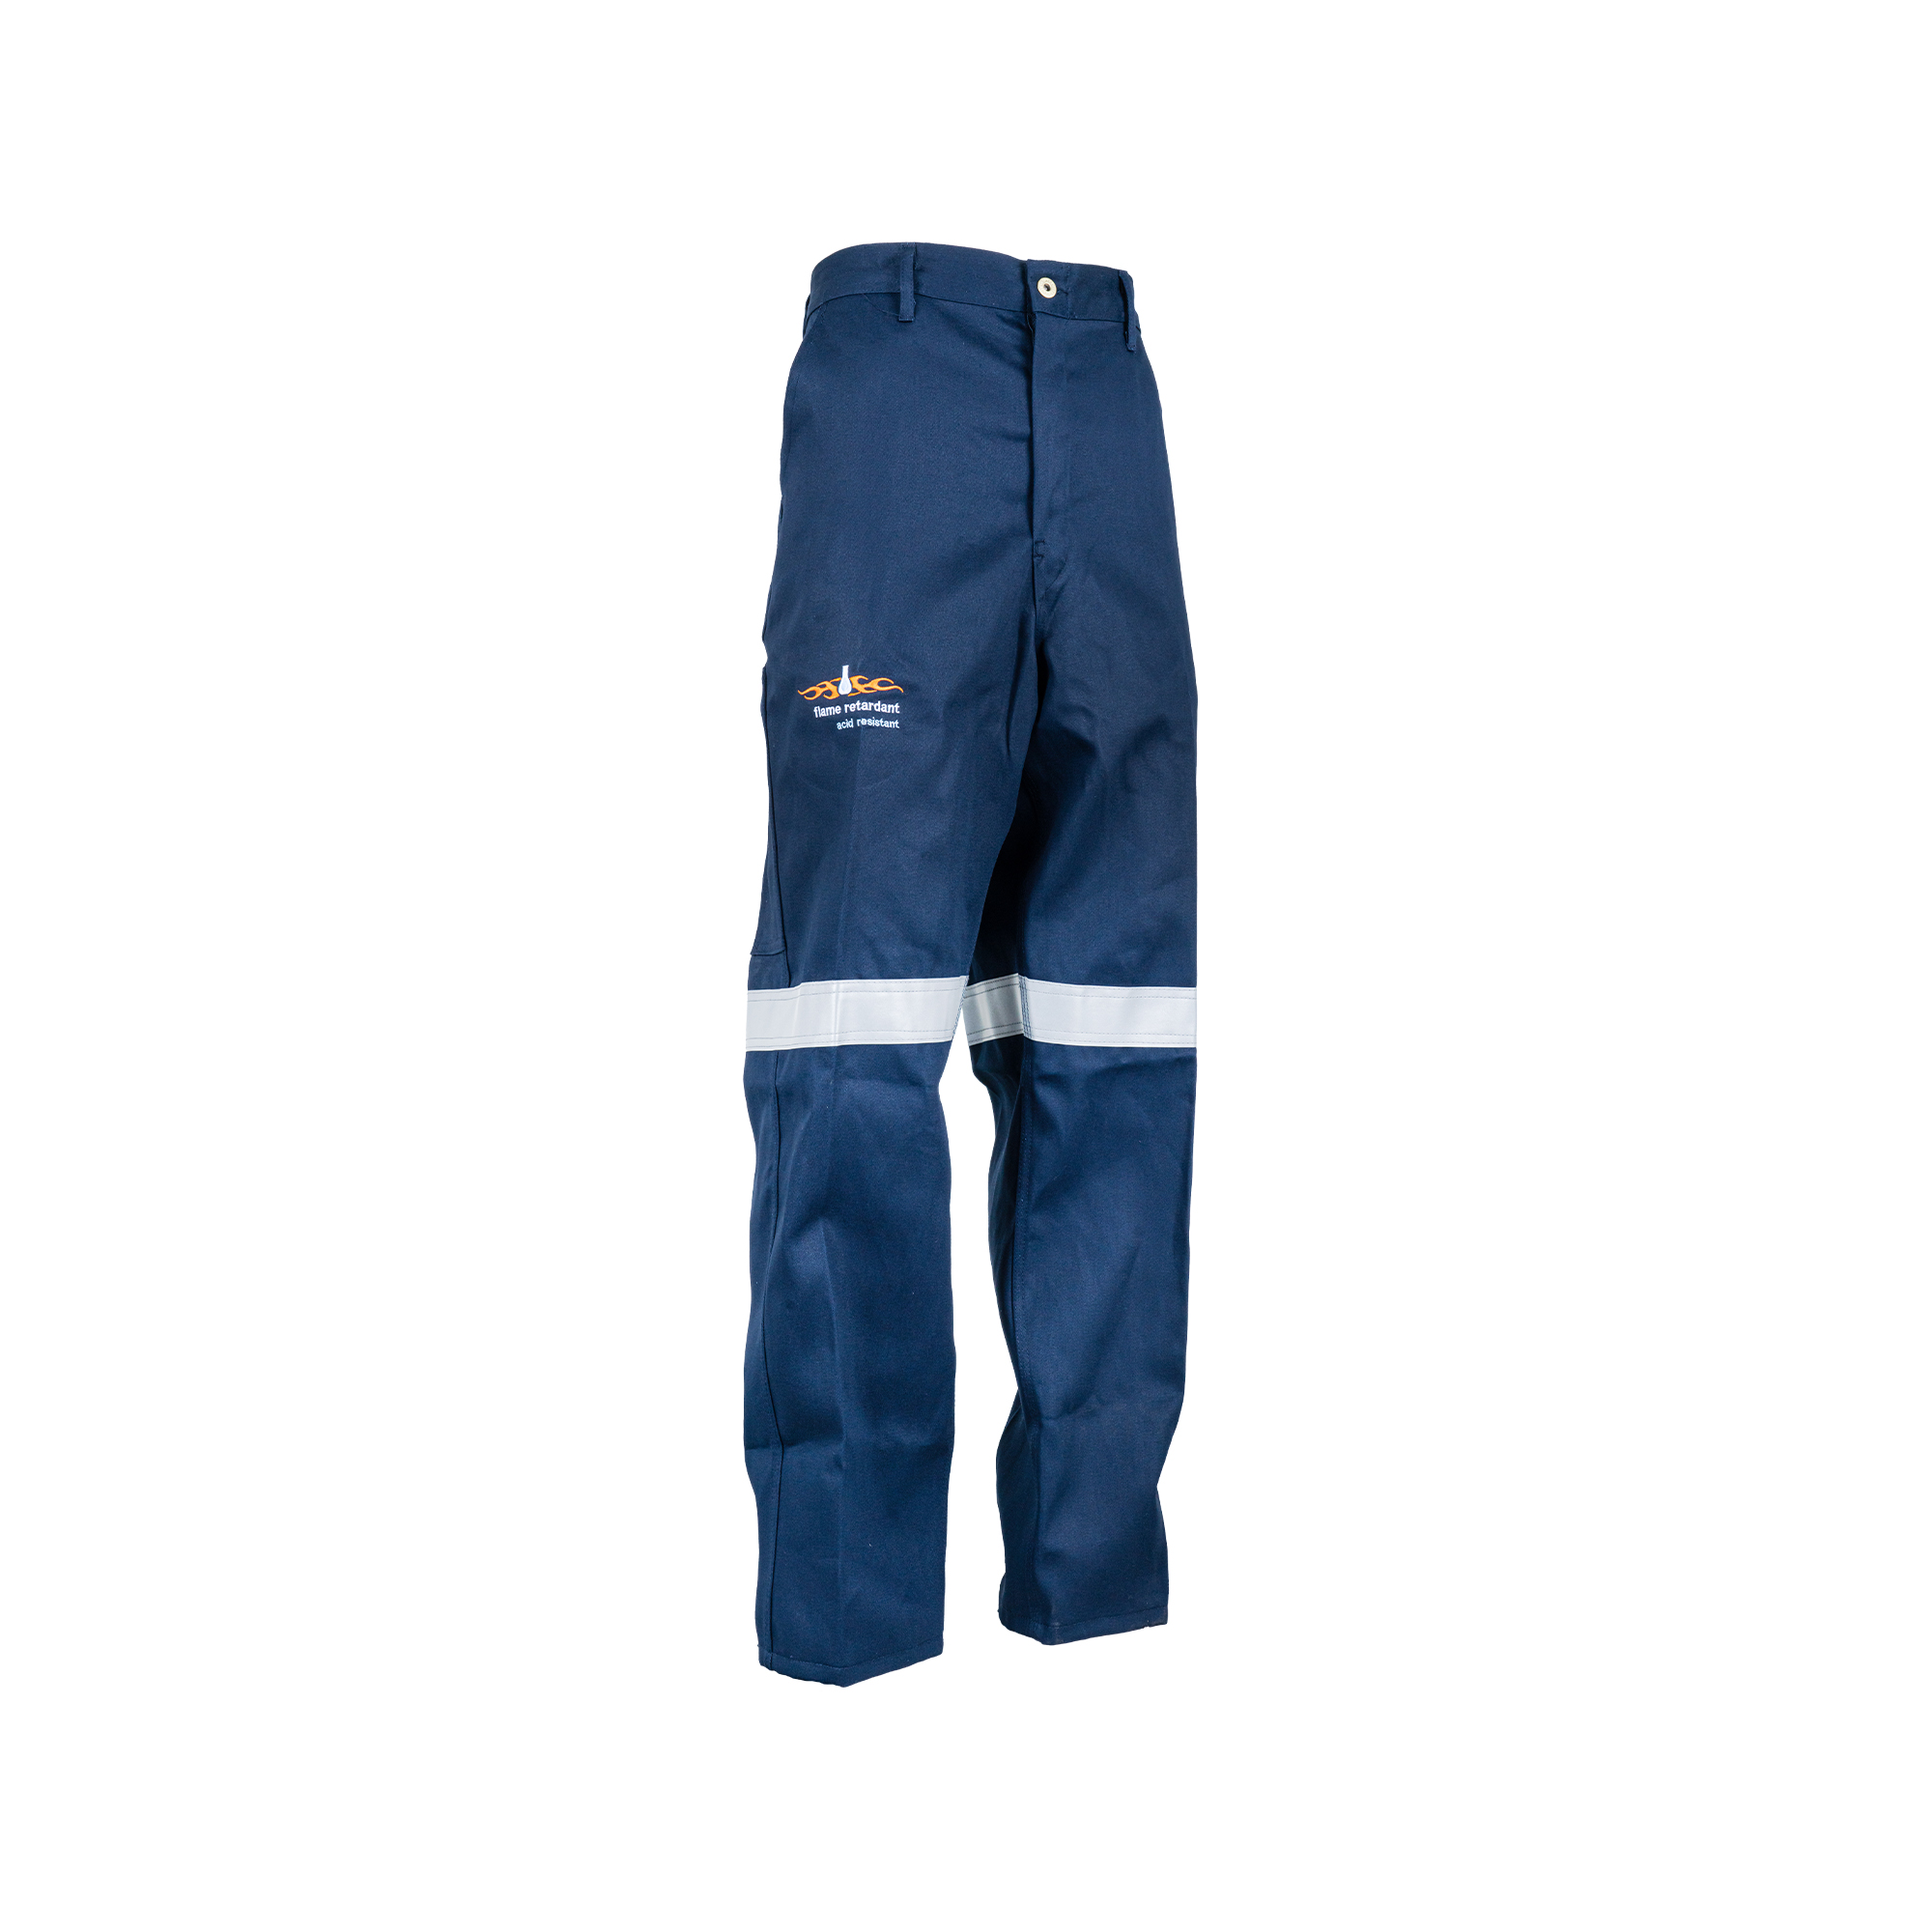 Sweet-Orr Acid Flame Overall Trousers Navy Blue - Protekta Safety Gear